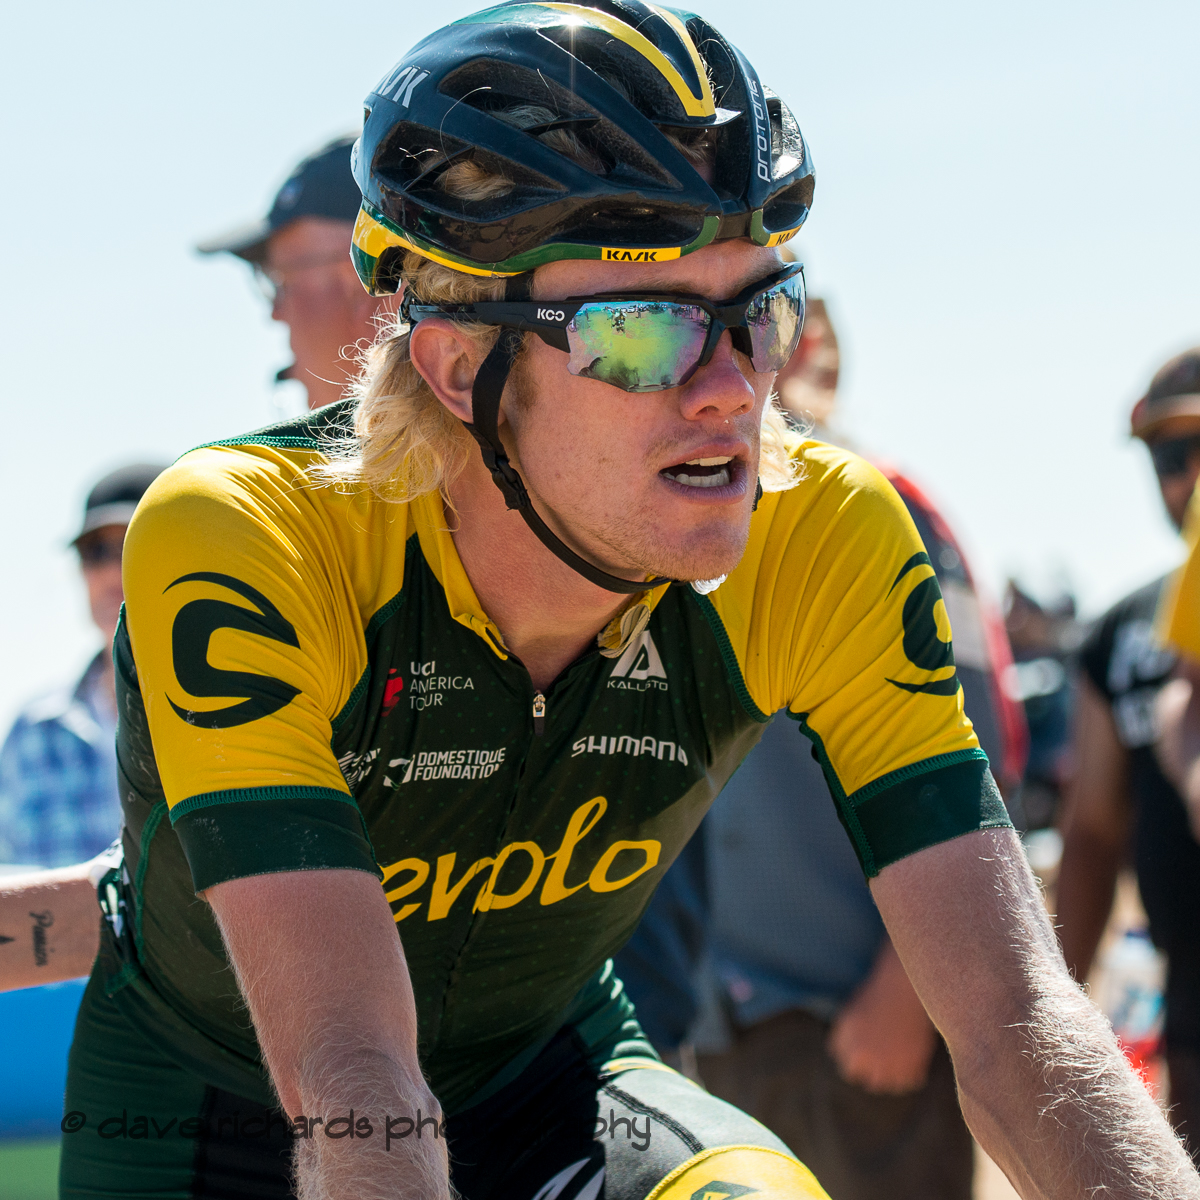 Aevolo rider catches his breath after Stage 2 - Brigham City to Powder Mountain Resort, 2019 LHM Tour of Utah (Photo by Dave Richards, daverphoto.com)